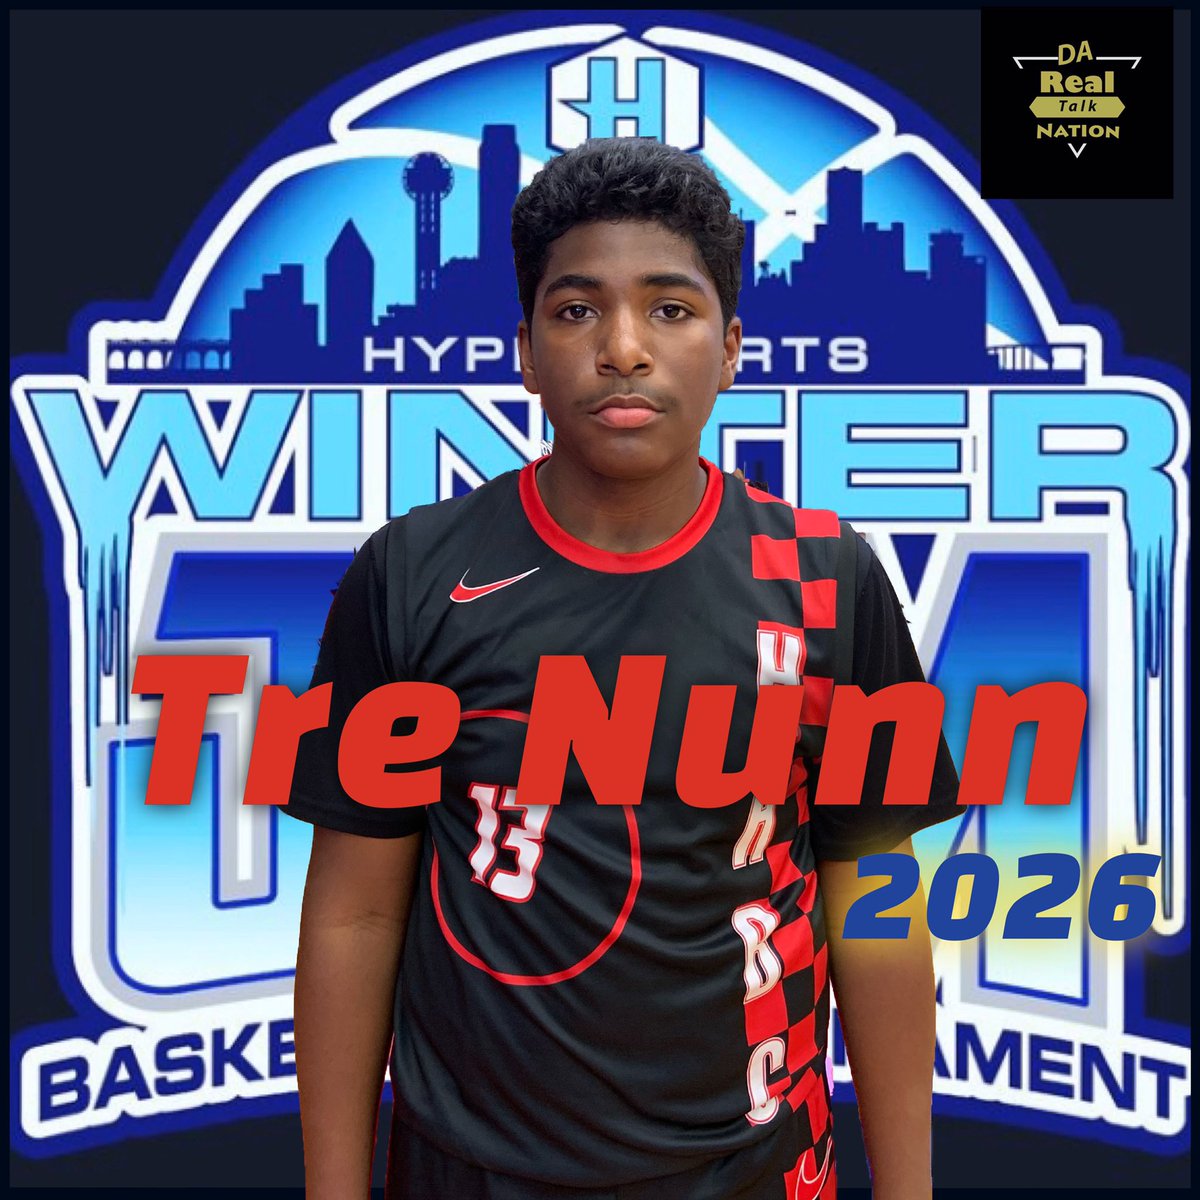 @hypesports #WinterJam2020 gave us another young Big Man to keep ur Lazy 👁 on in Houston Hoops 2026 TRE NUNN (Duncanville,TX)! He has a family gene that tells me he will be special, right now, he’s still putting 2gether; gets buckets; uses length well 2 #DaREALtalkNation